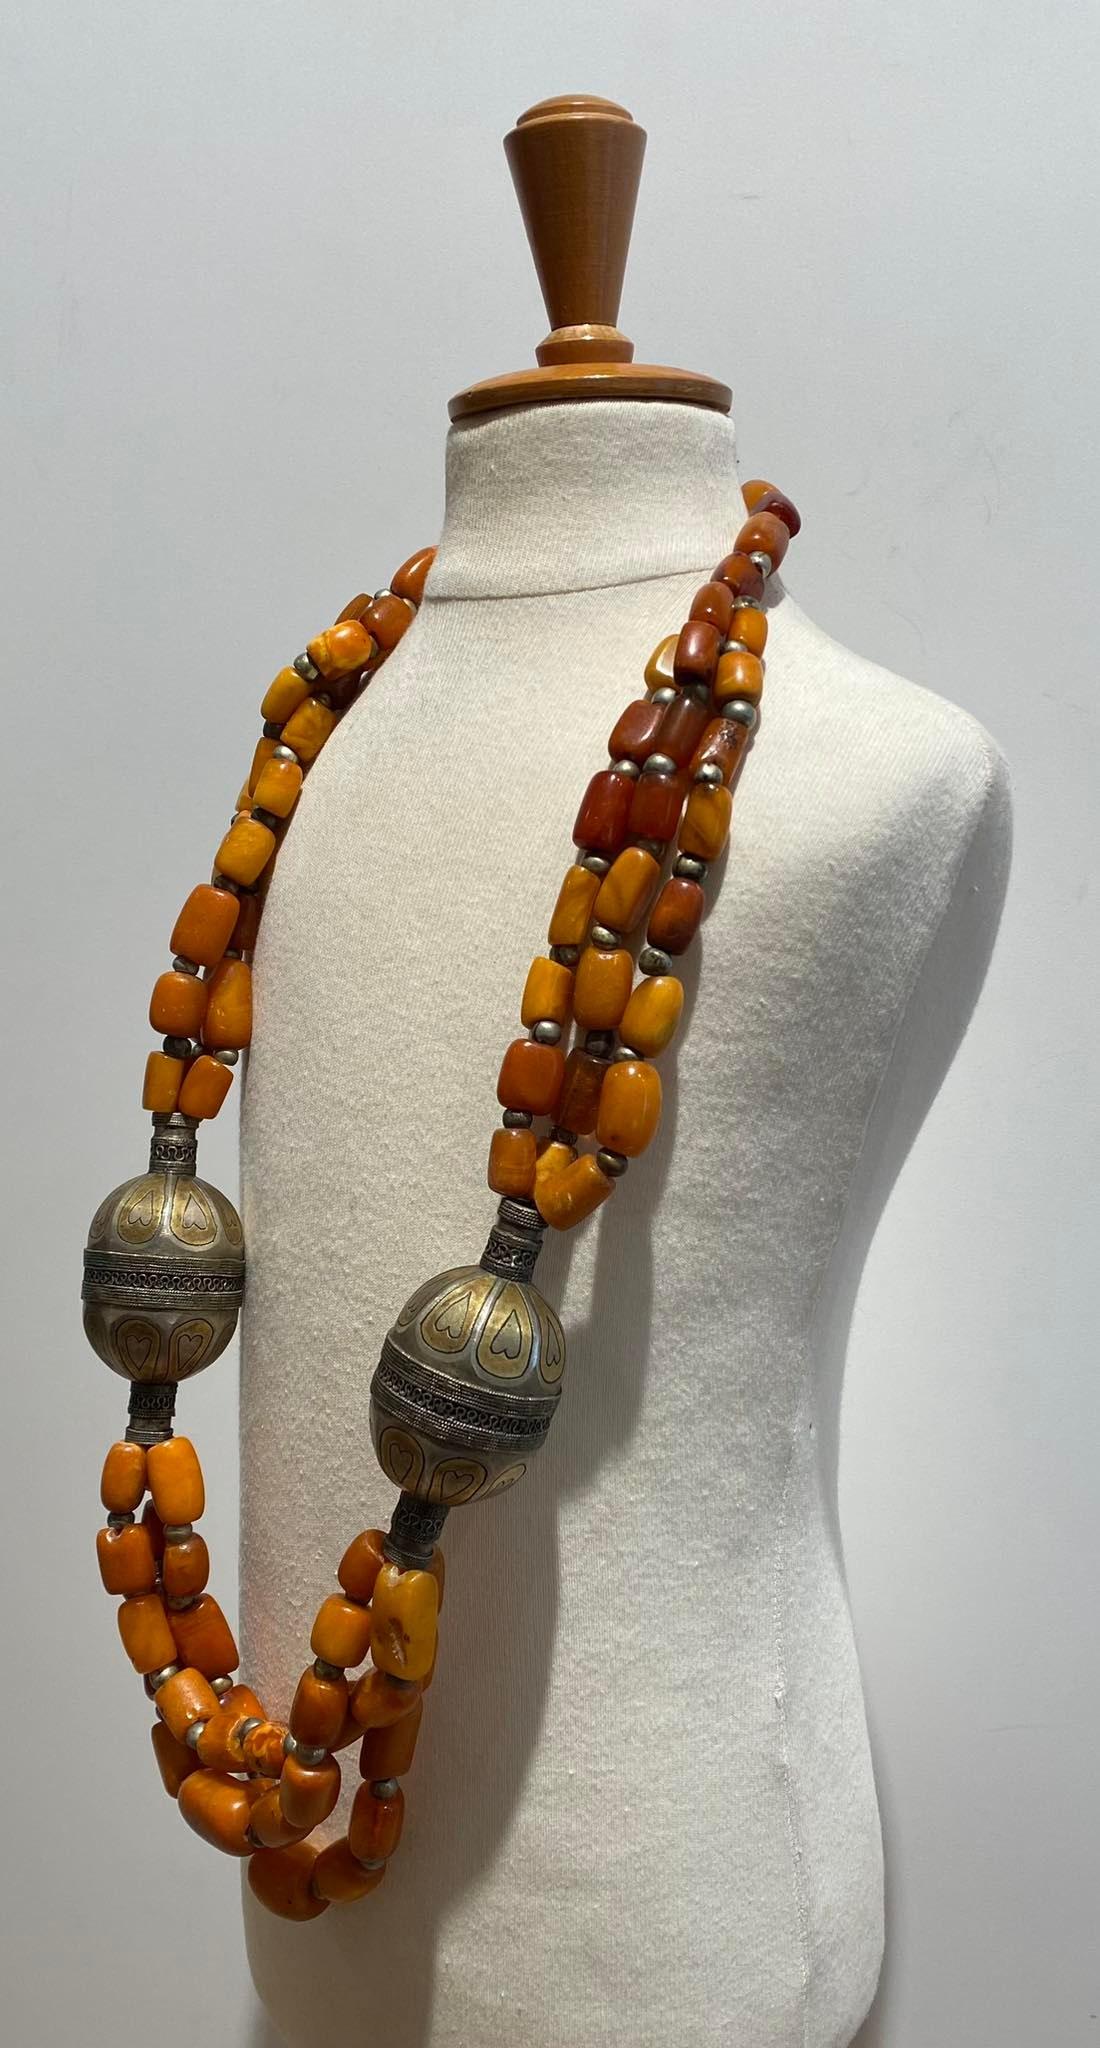  Antique Amber Necklace Yemen Afghanistan 18/19th Century Islamic Art silver  For Sale 5